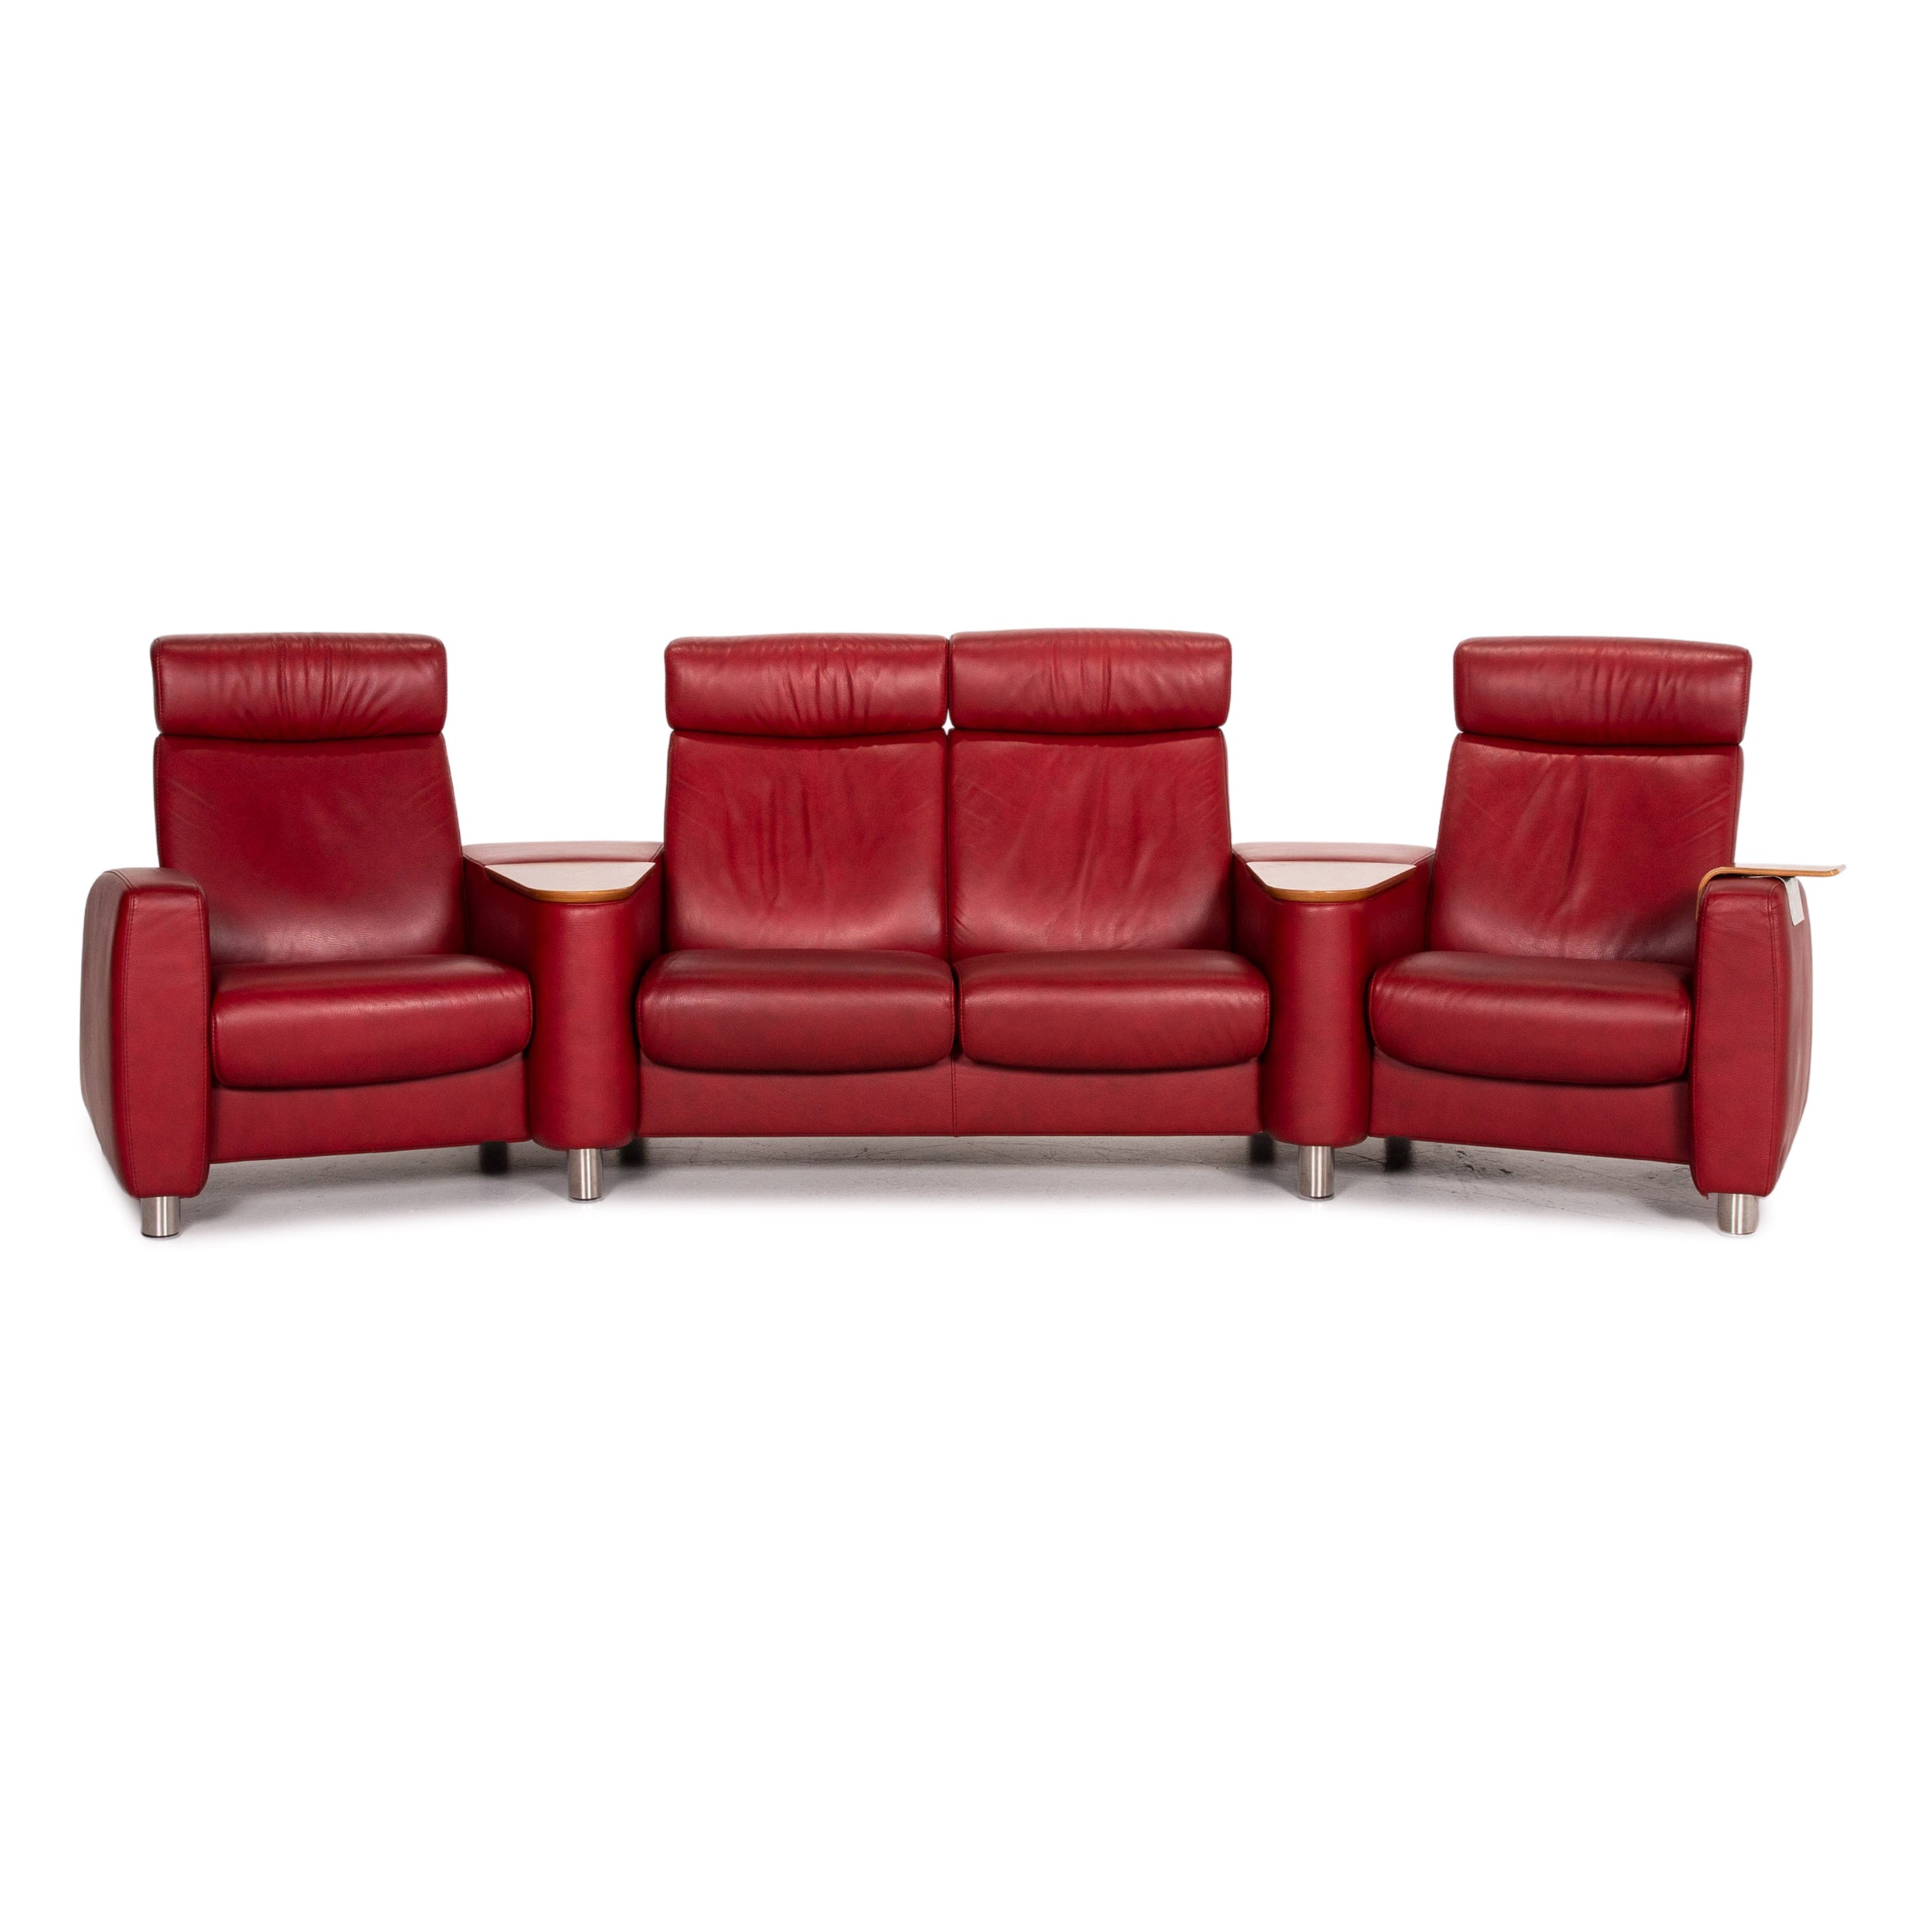 Stressless Arion Leather Sofa Red Four Seater Home Theater Relaxation Function Couch #14524